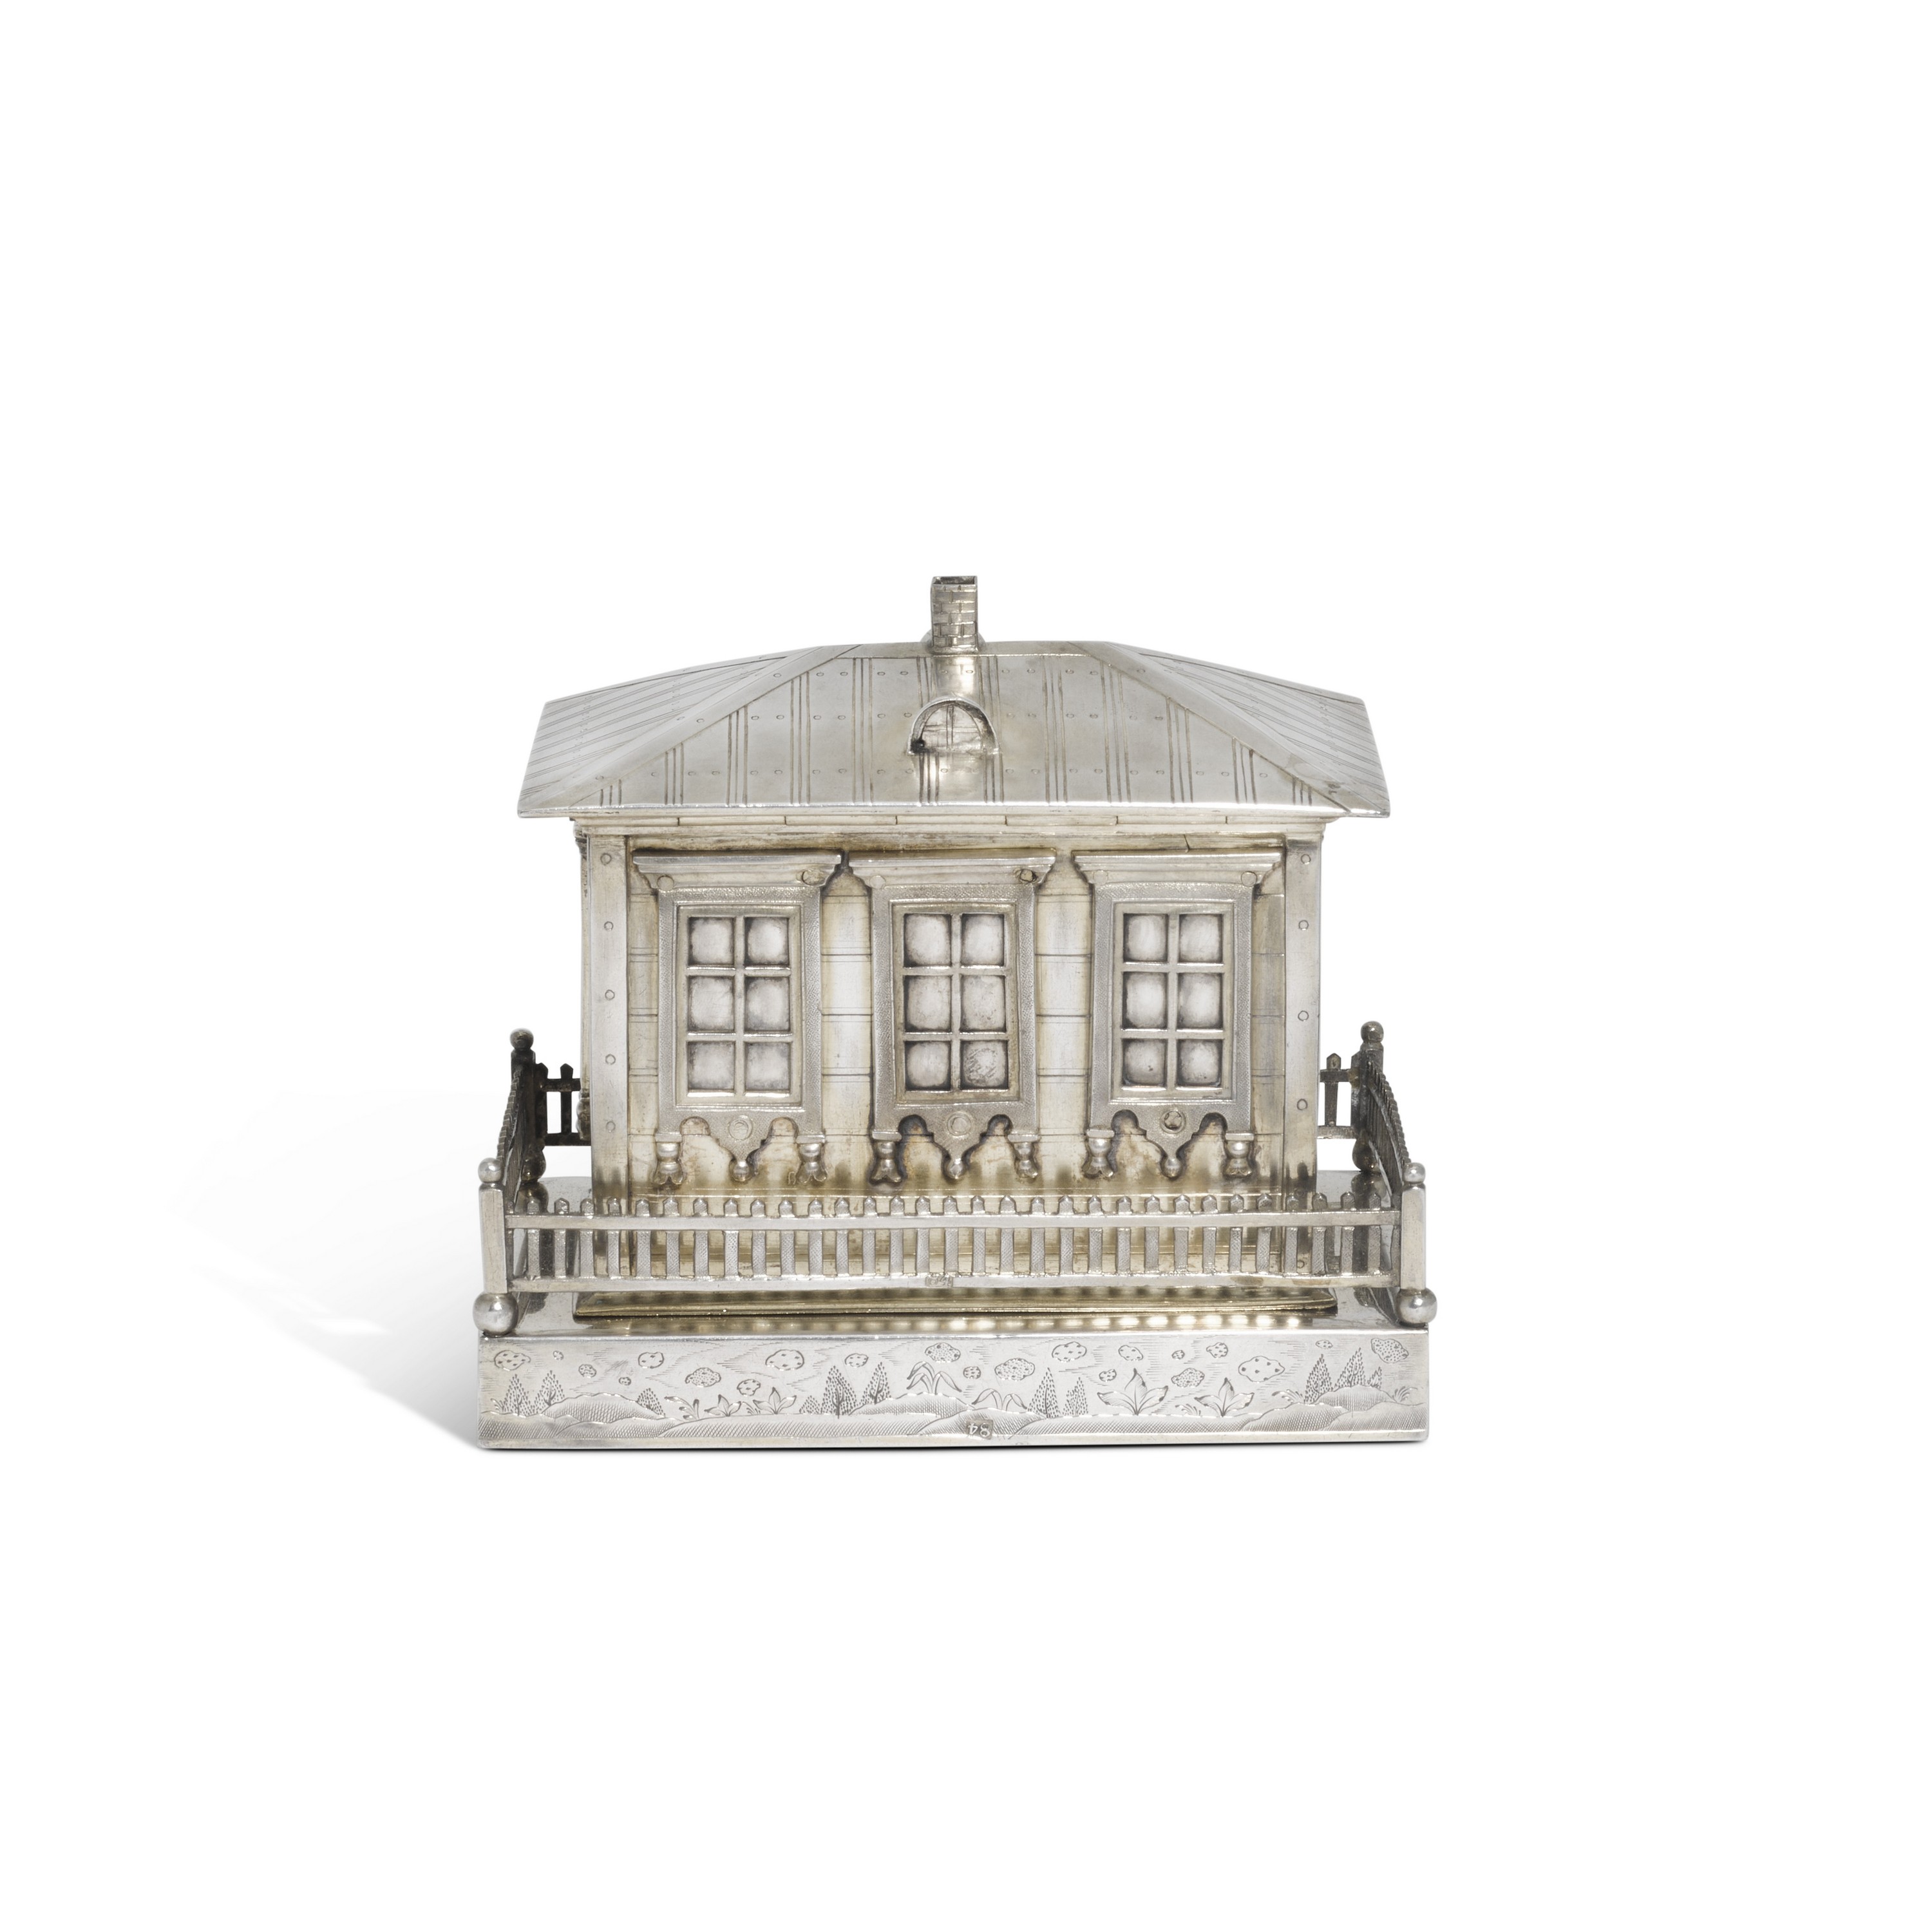 A silver trompe l'oeil box modelled as a house, Andrei Wekman, Moscow, 1869 - Image 4 of 5